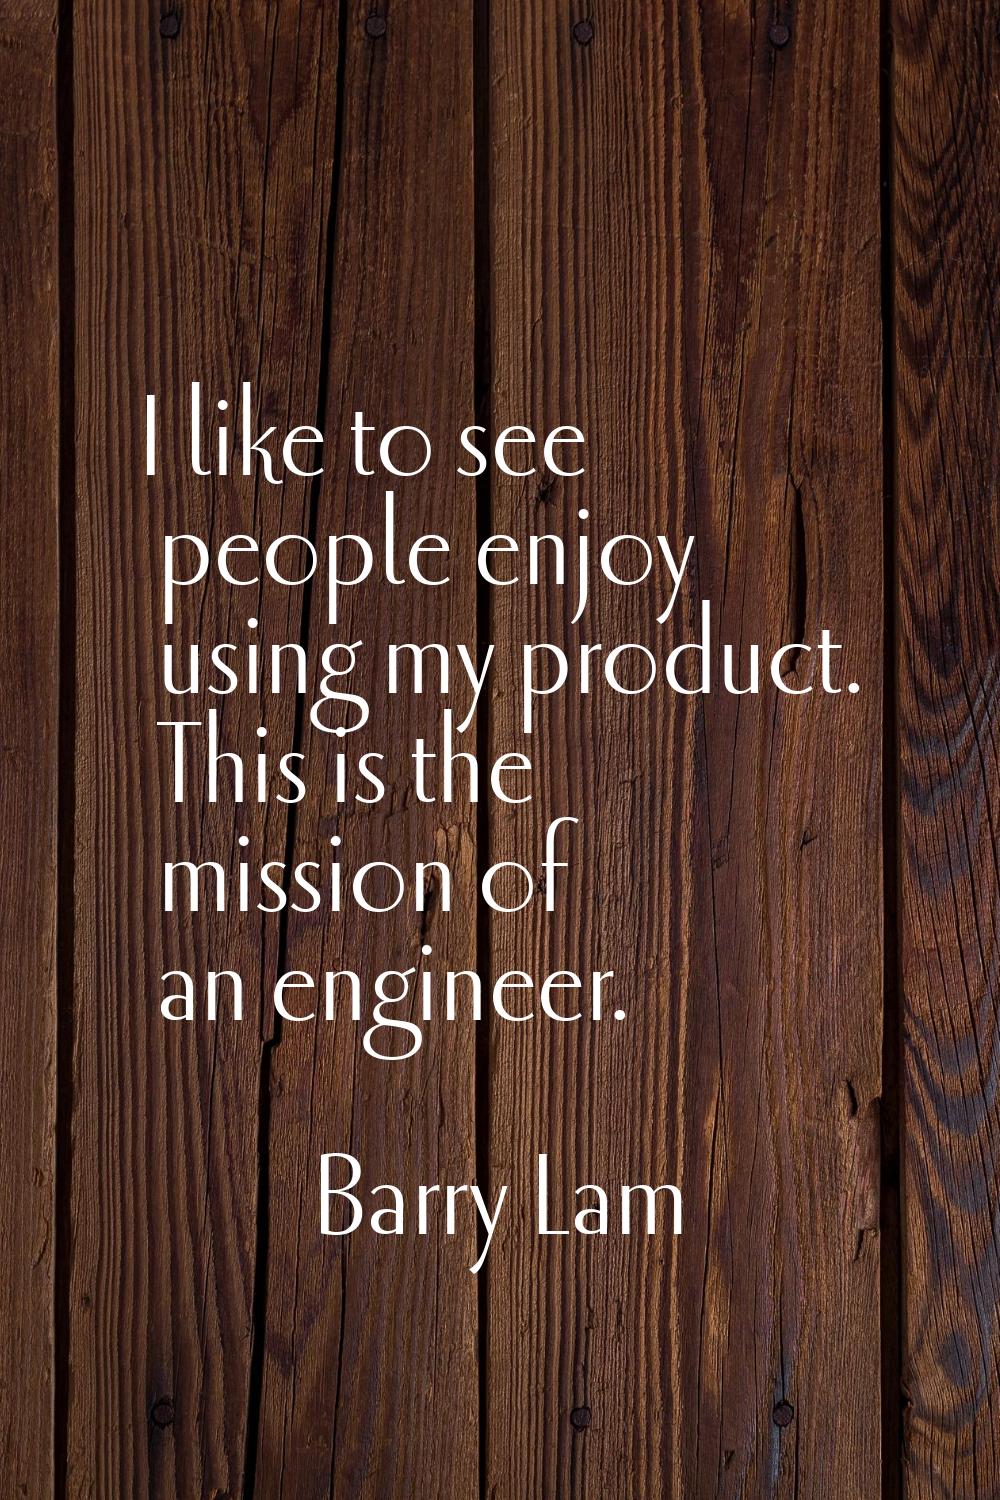 I like to see people enjoy using my product. This is the mission of an engineer.